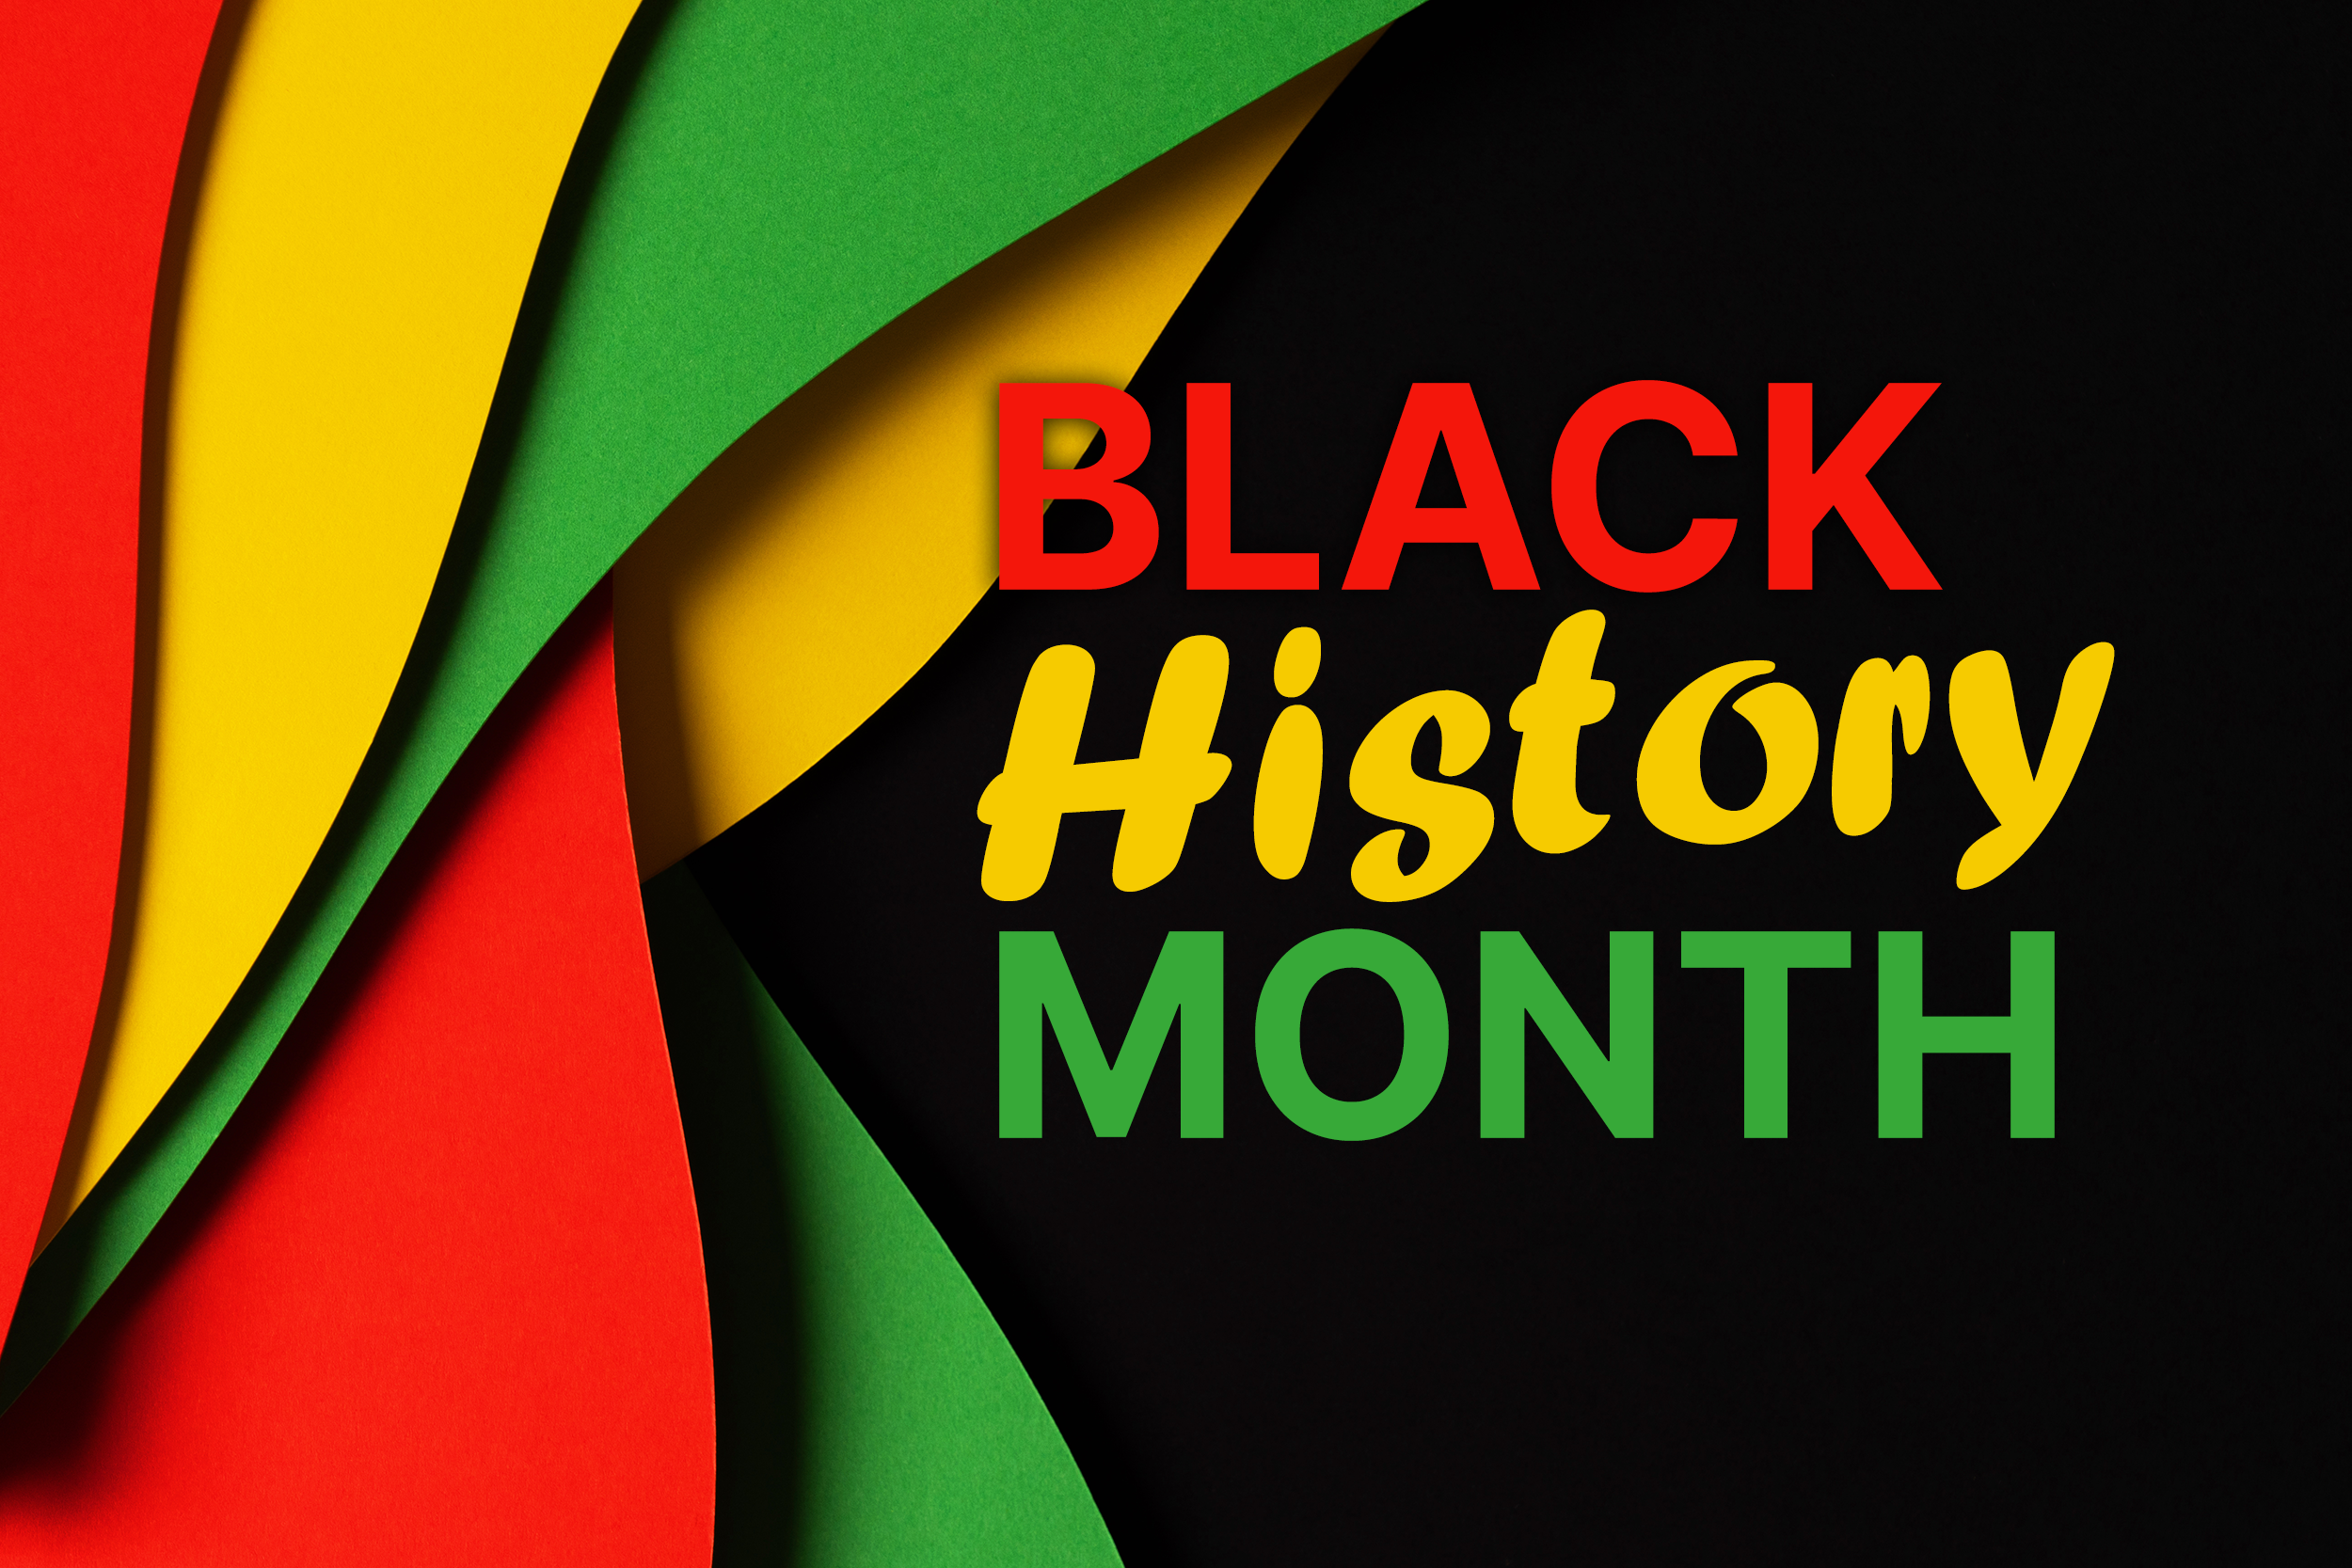 Image with words Black History Month